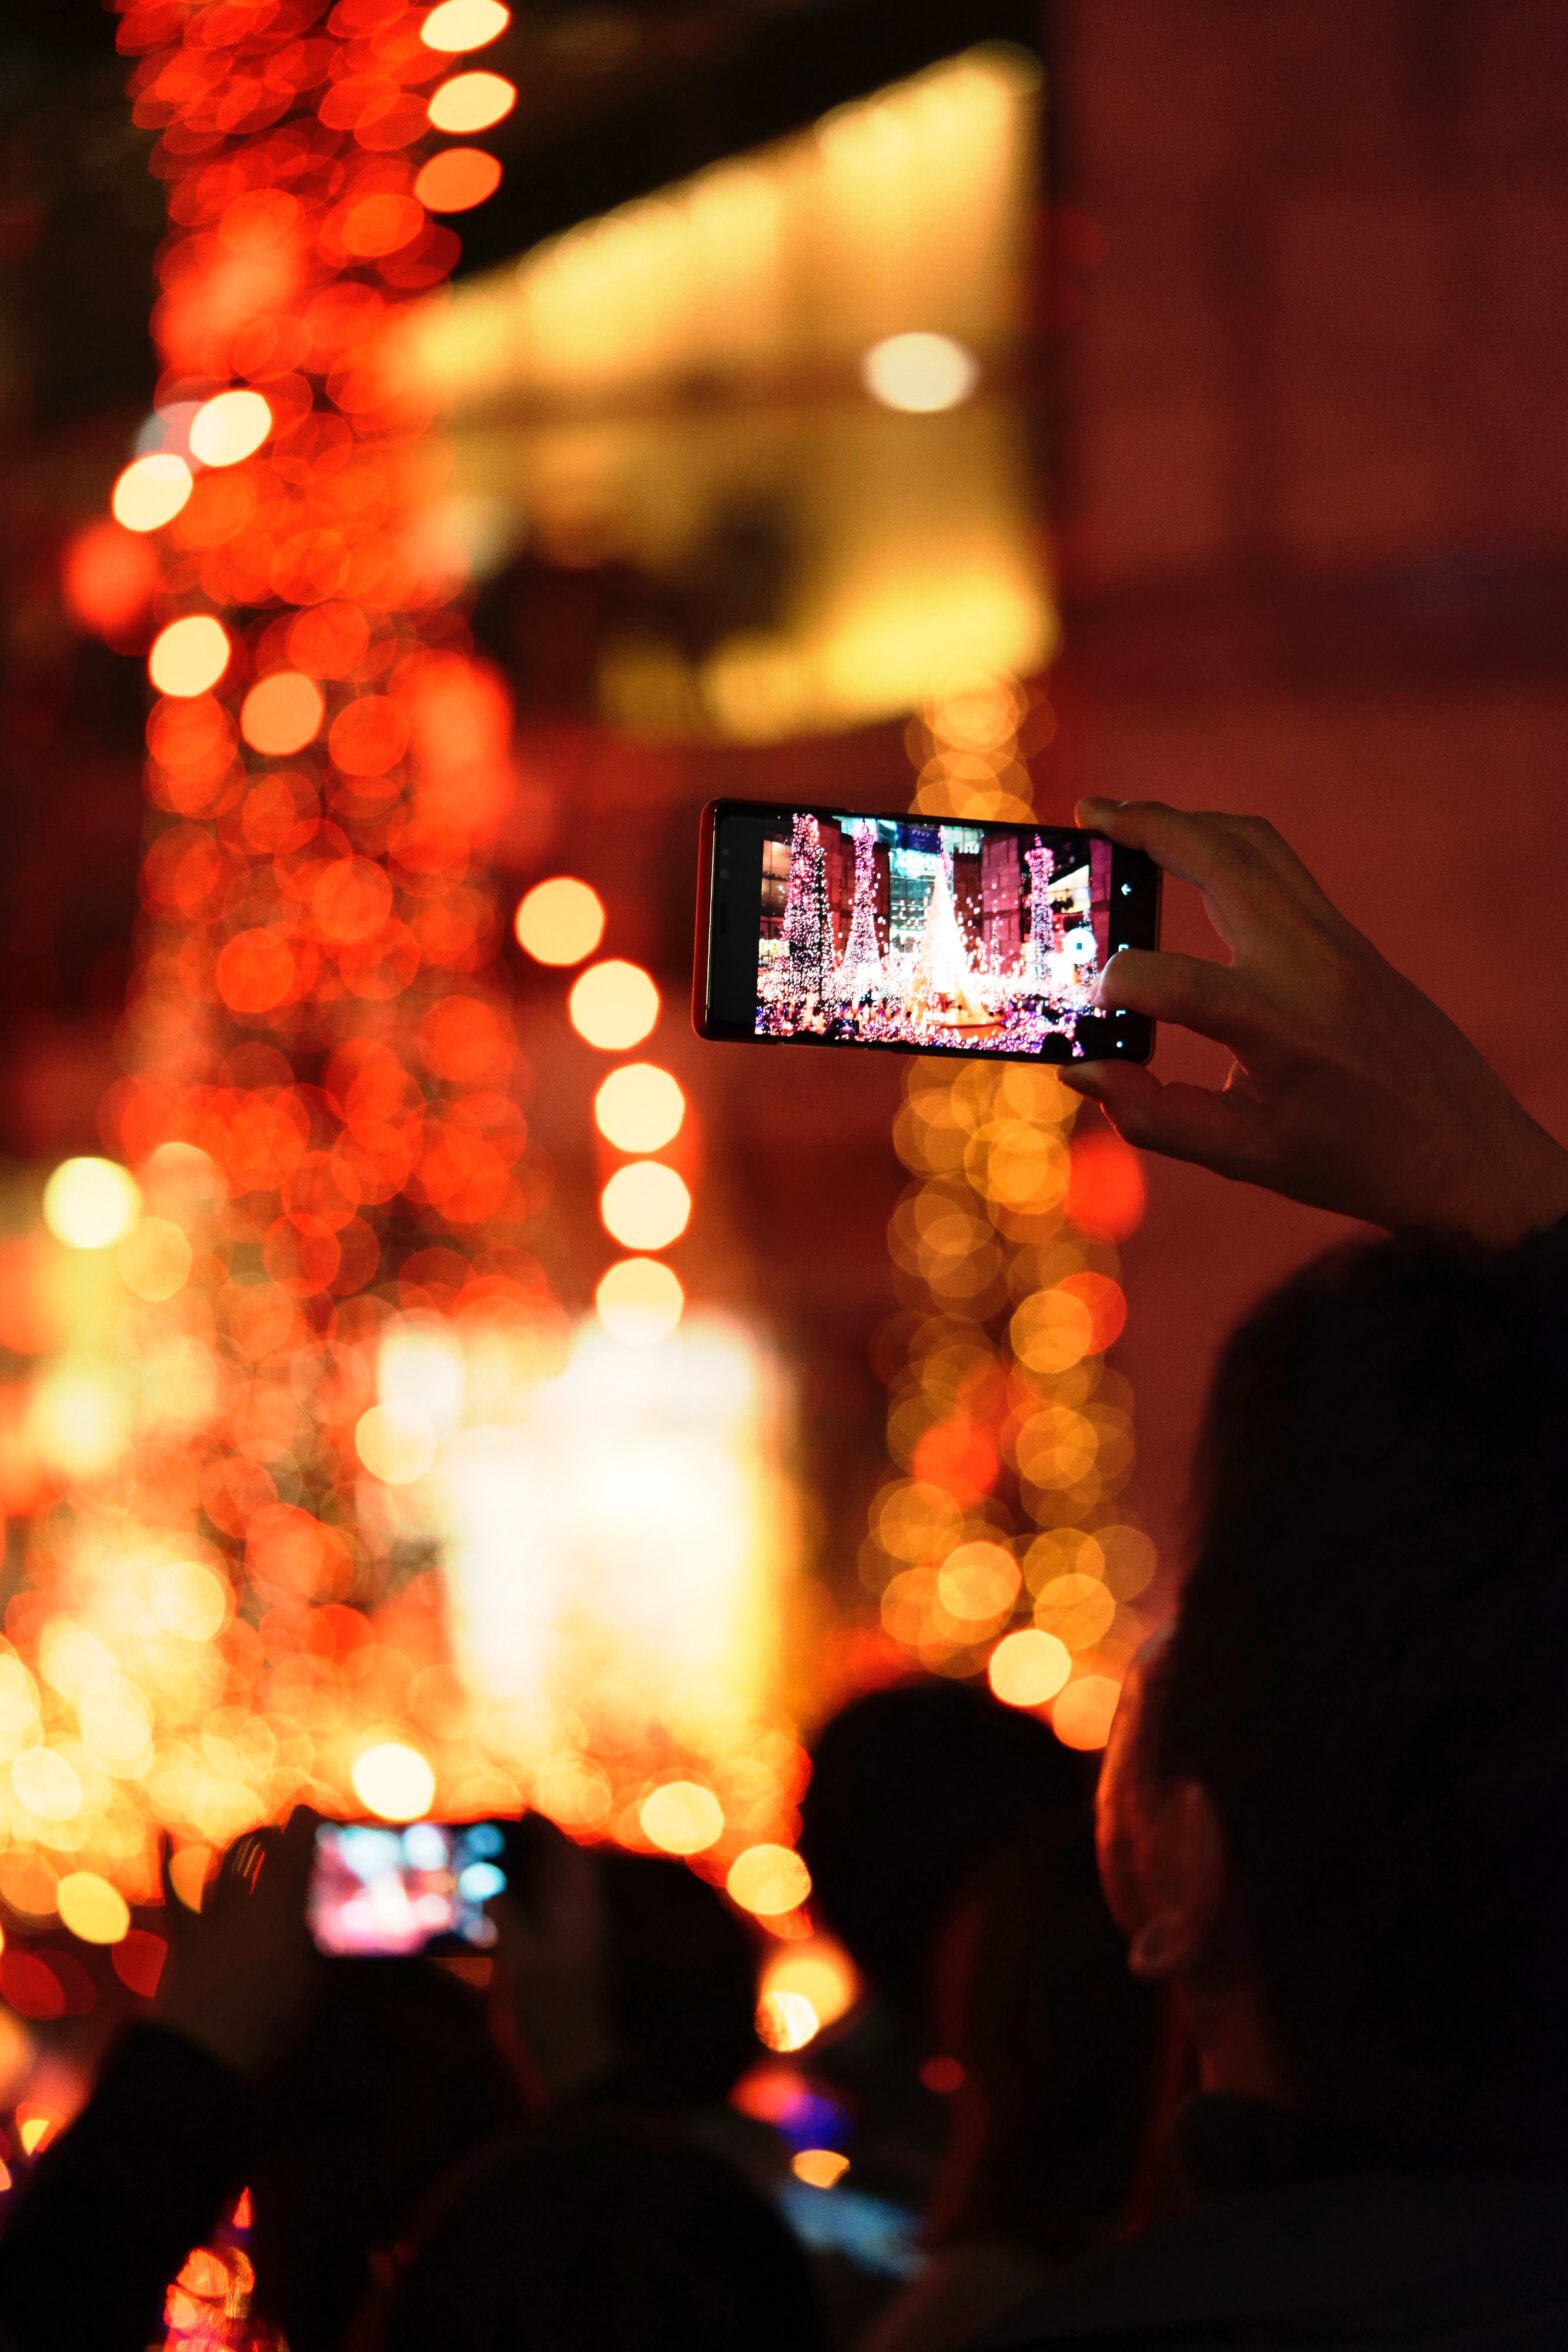 person taking photo of Christmas lights with mobile phone